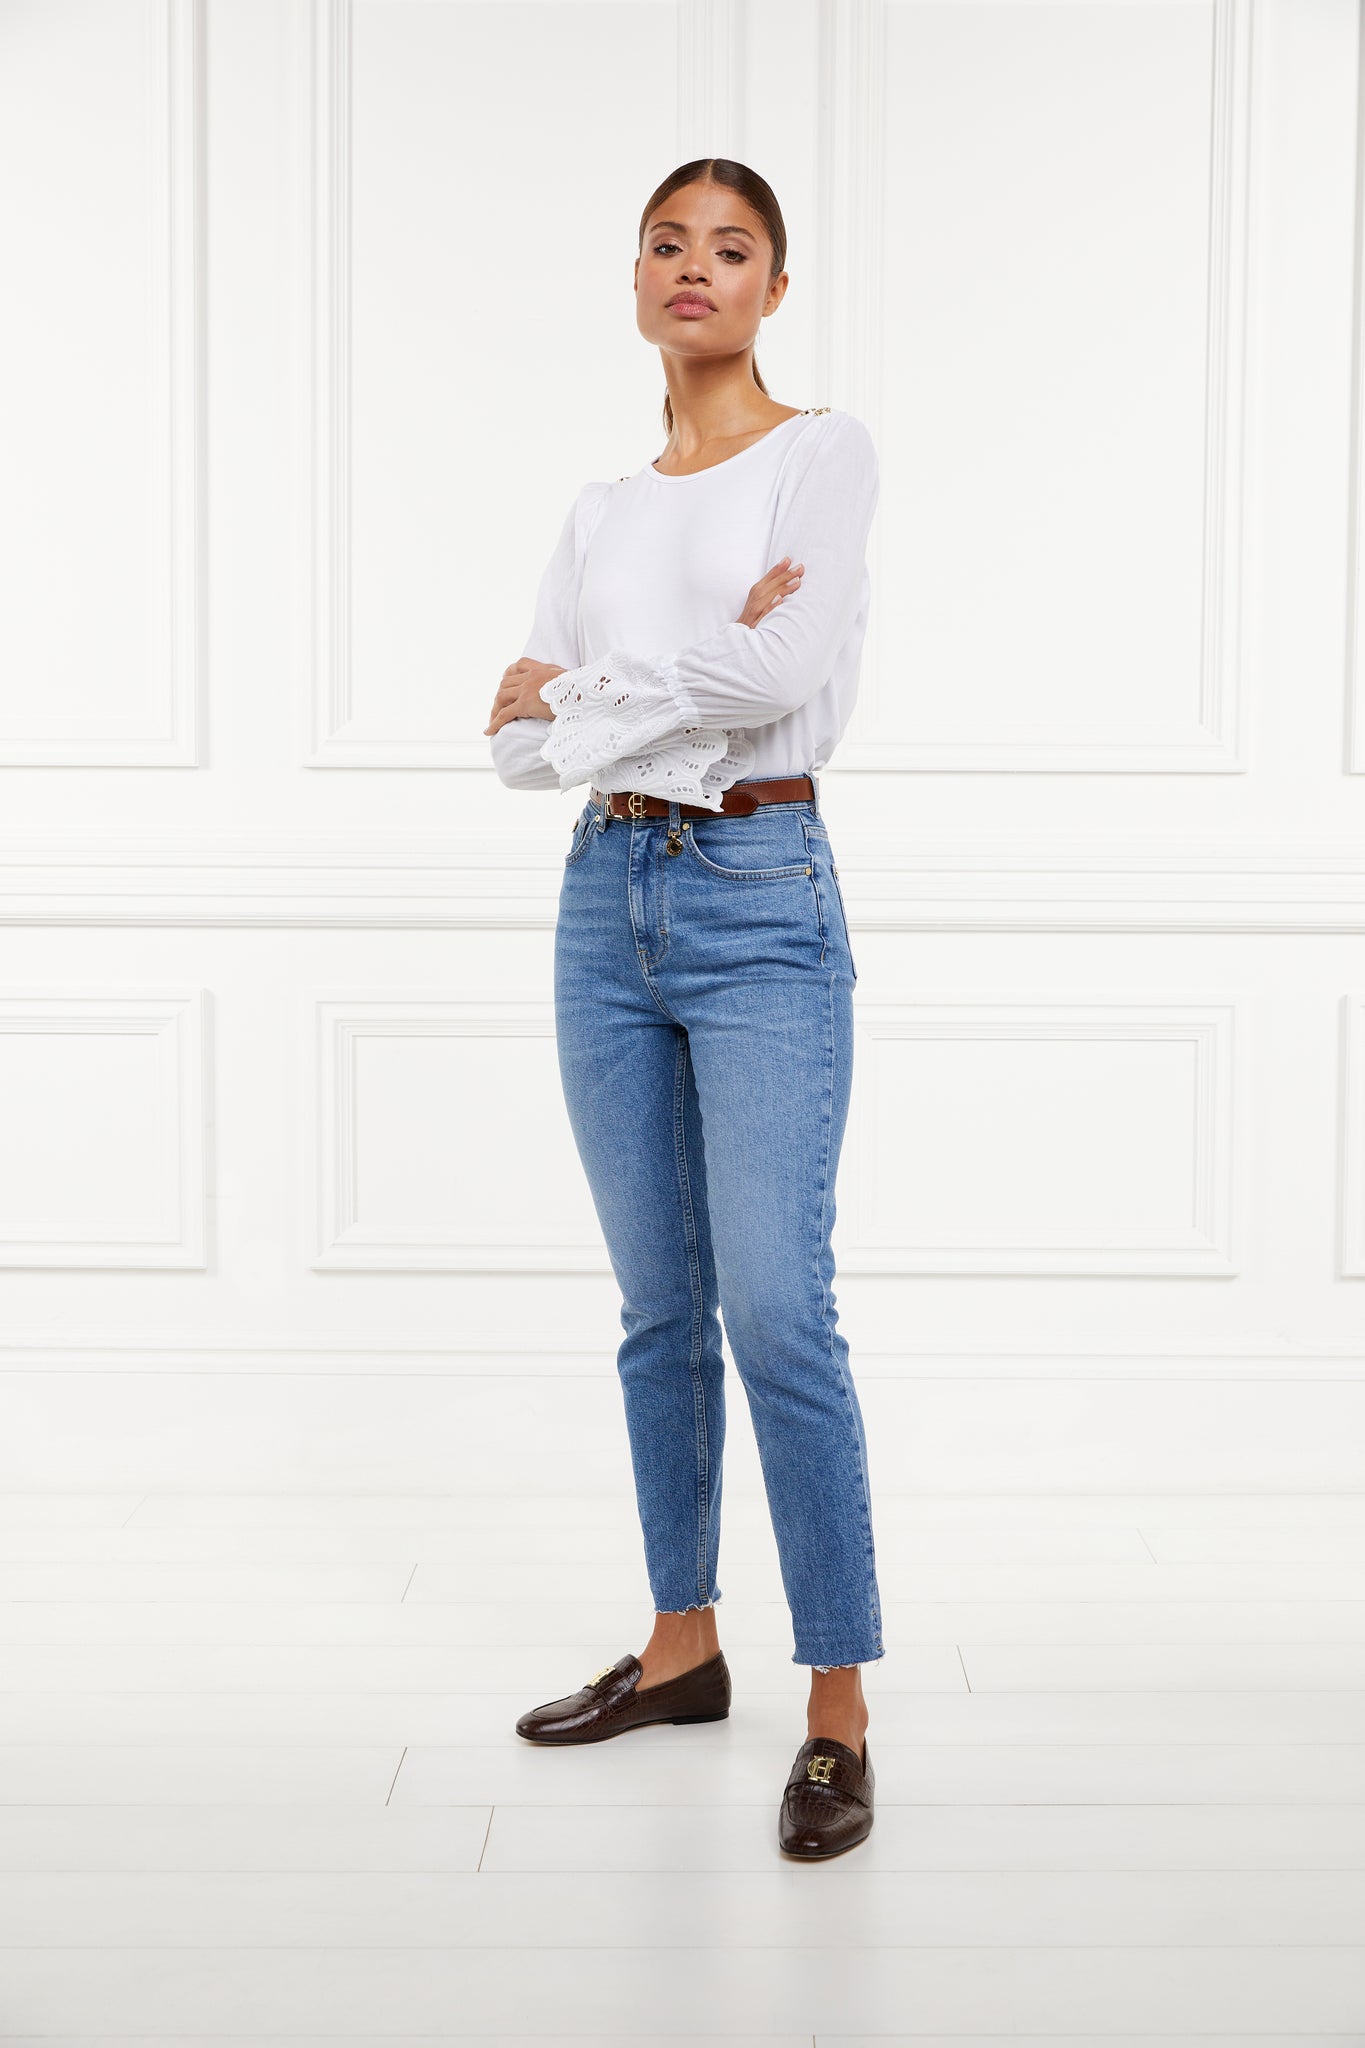 Crew neck top with voluminous sleeves with gathered details at the shoulder and broderie detailing above the cuff and detailed with Holland Cooper rivets on the shoulders